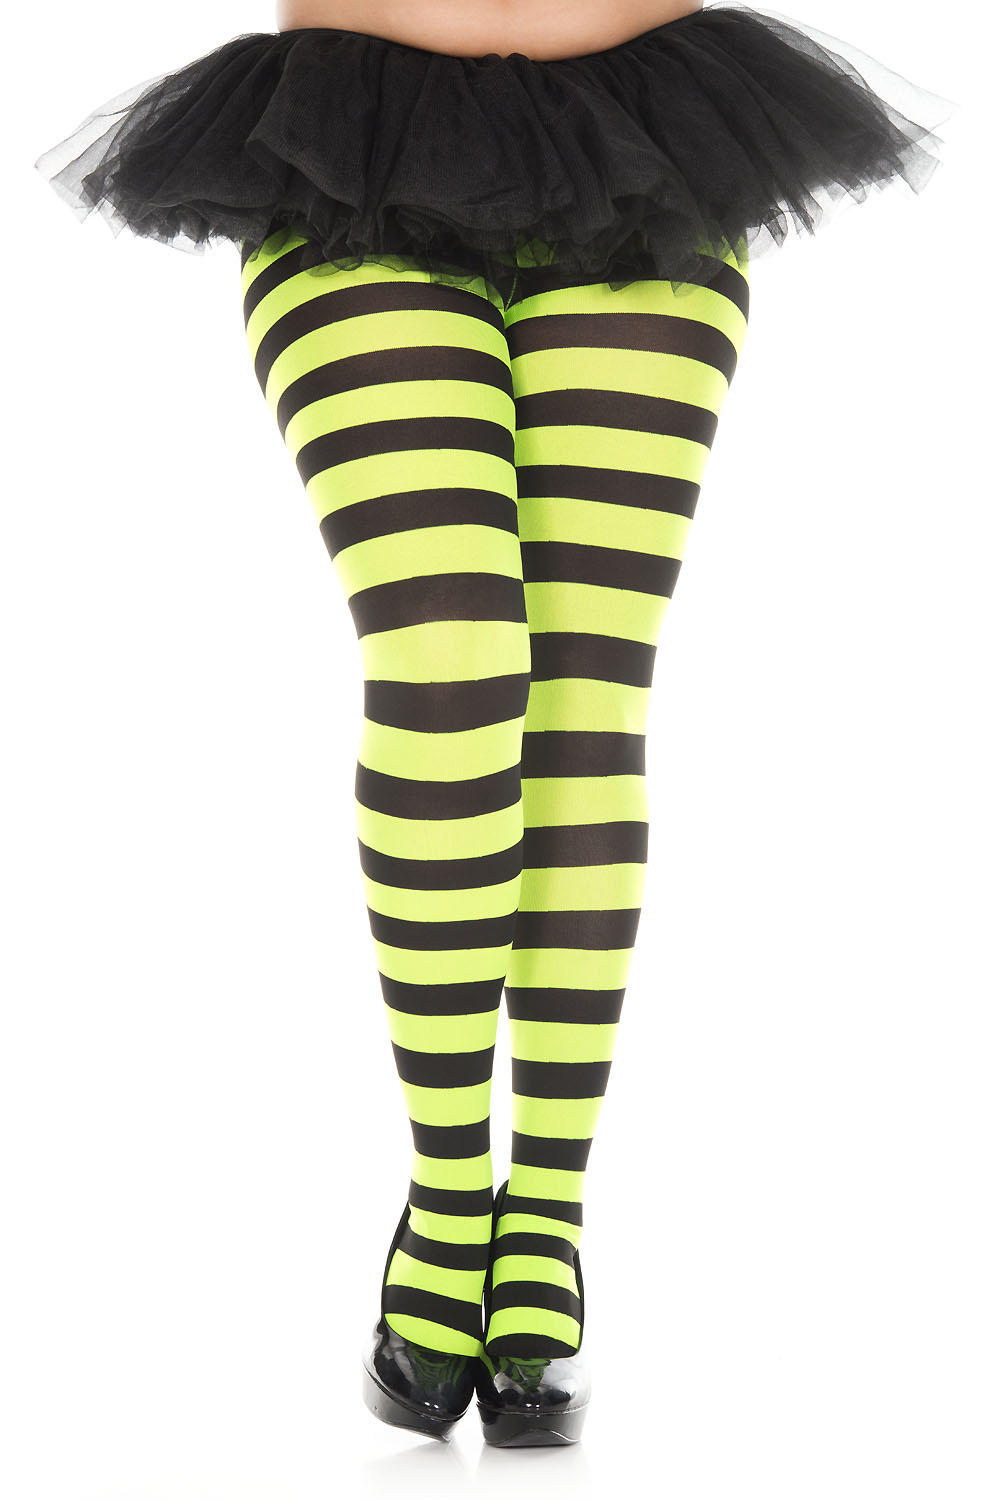 https://www.thecostumeland.com/images/zoom/ml7419qbkng-plus-size-black-and-neon-green-wide-striped-women-tights.jpg